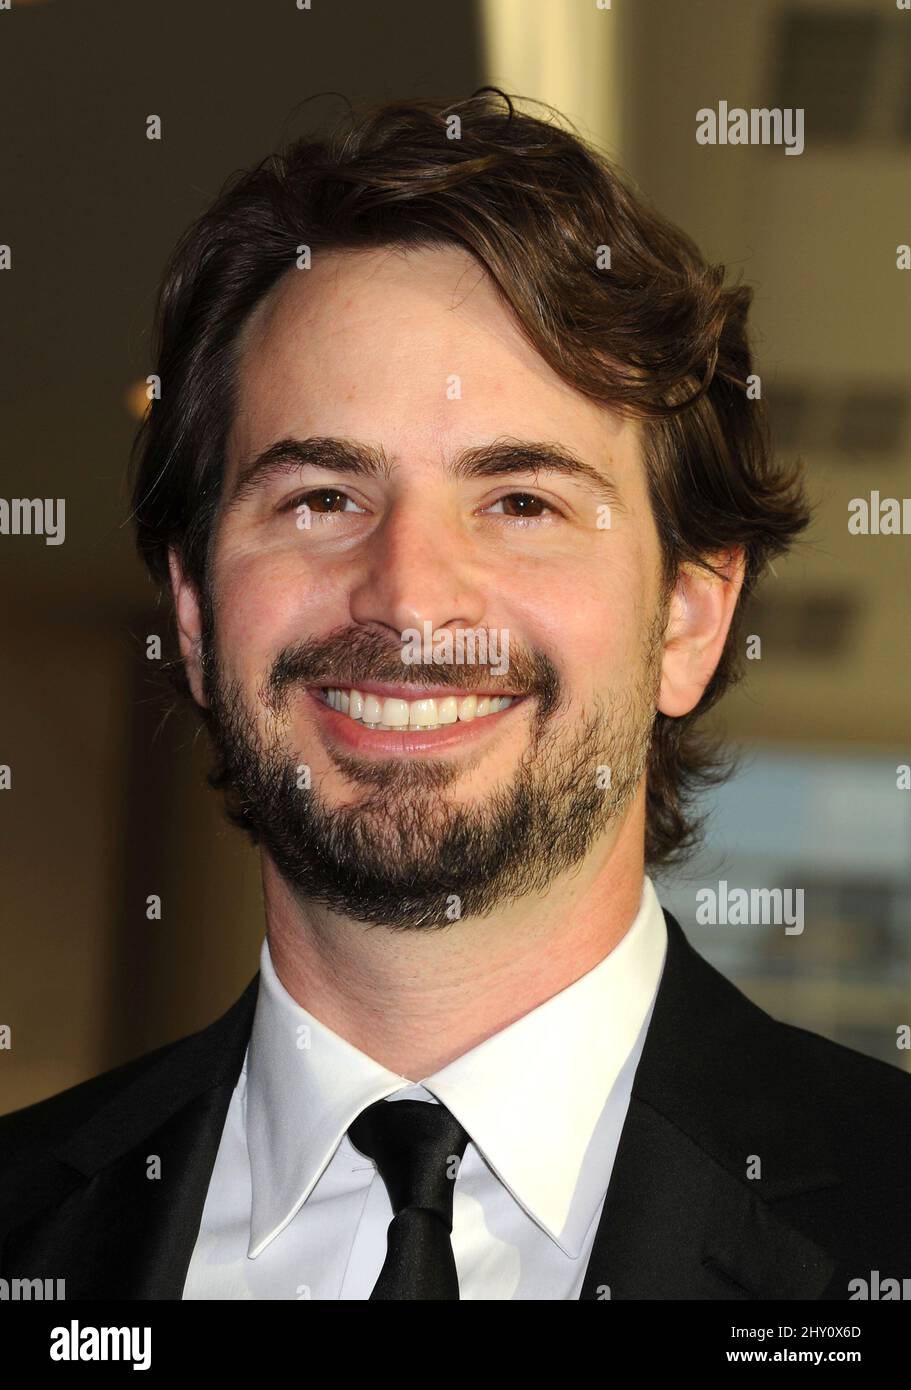 Mark Boal attending the 2013 Writers Guild Awards held at the JW Marriott in Los Angeles, California. Stock Photo